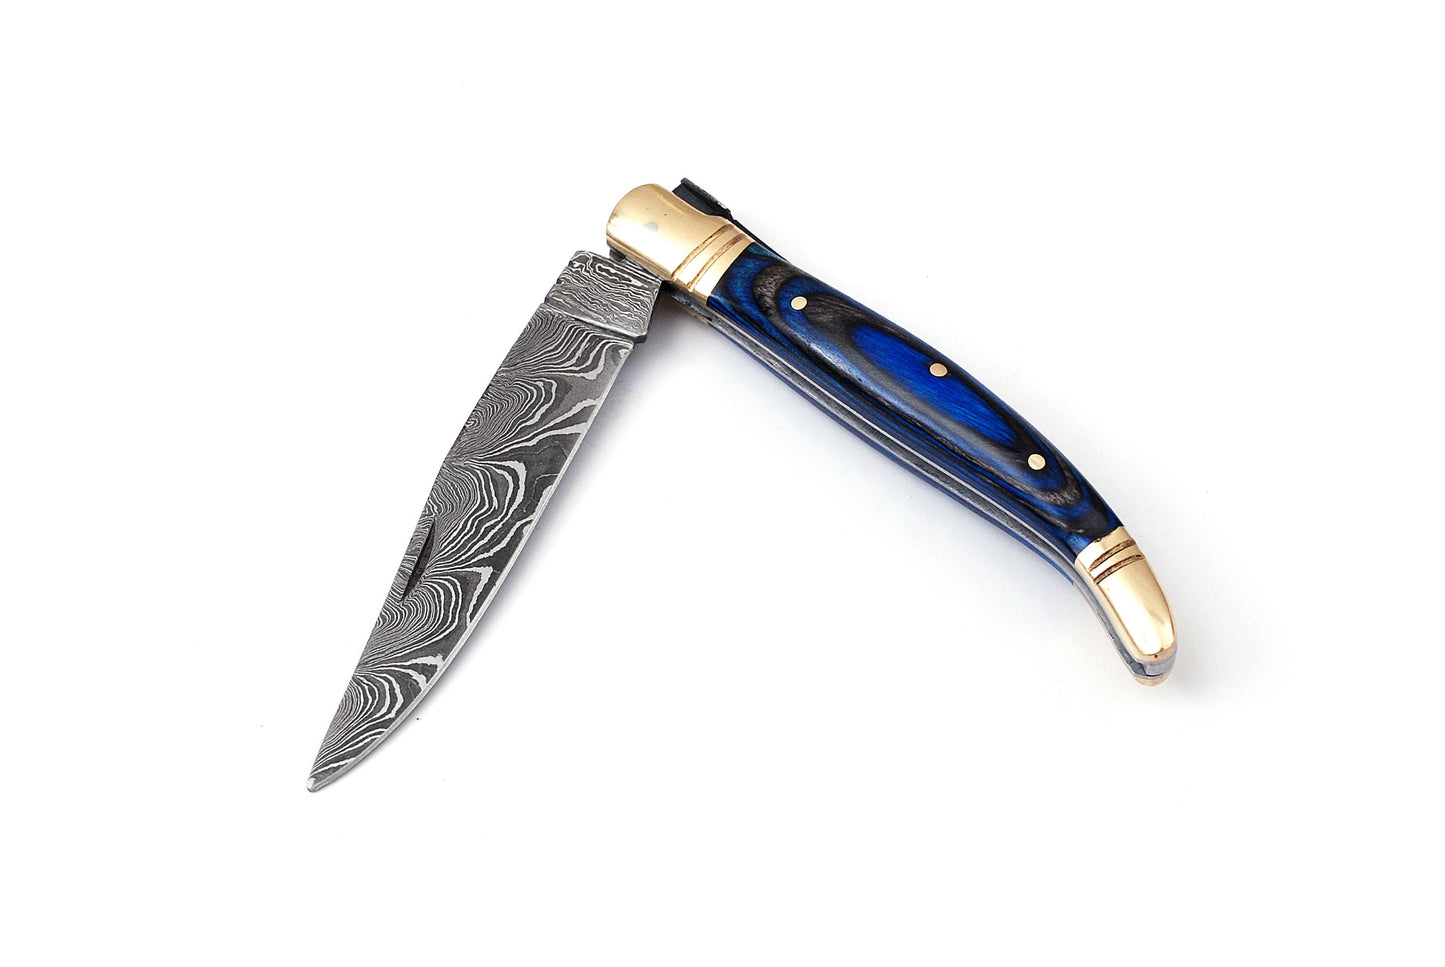 Copy of Laguiole Folding Damascus steel knife, 8.5" Long with 4" hand forged custom twist pattern Blade. 2 tone Blue wood scale with brass bolster, Cow hide leather sheath included